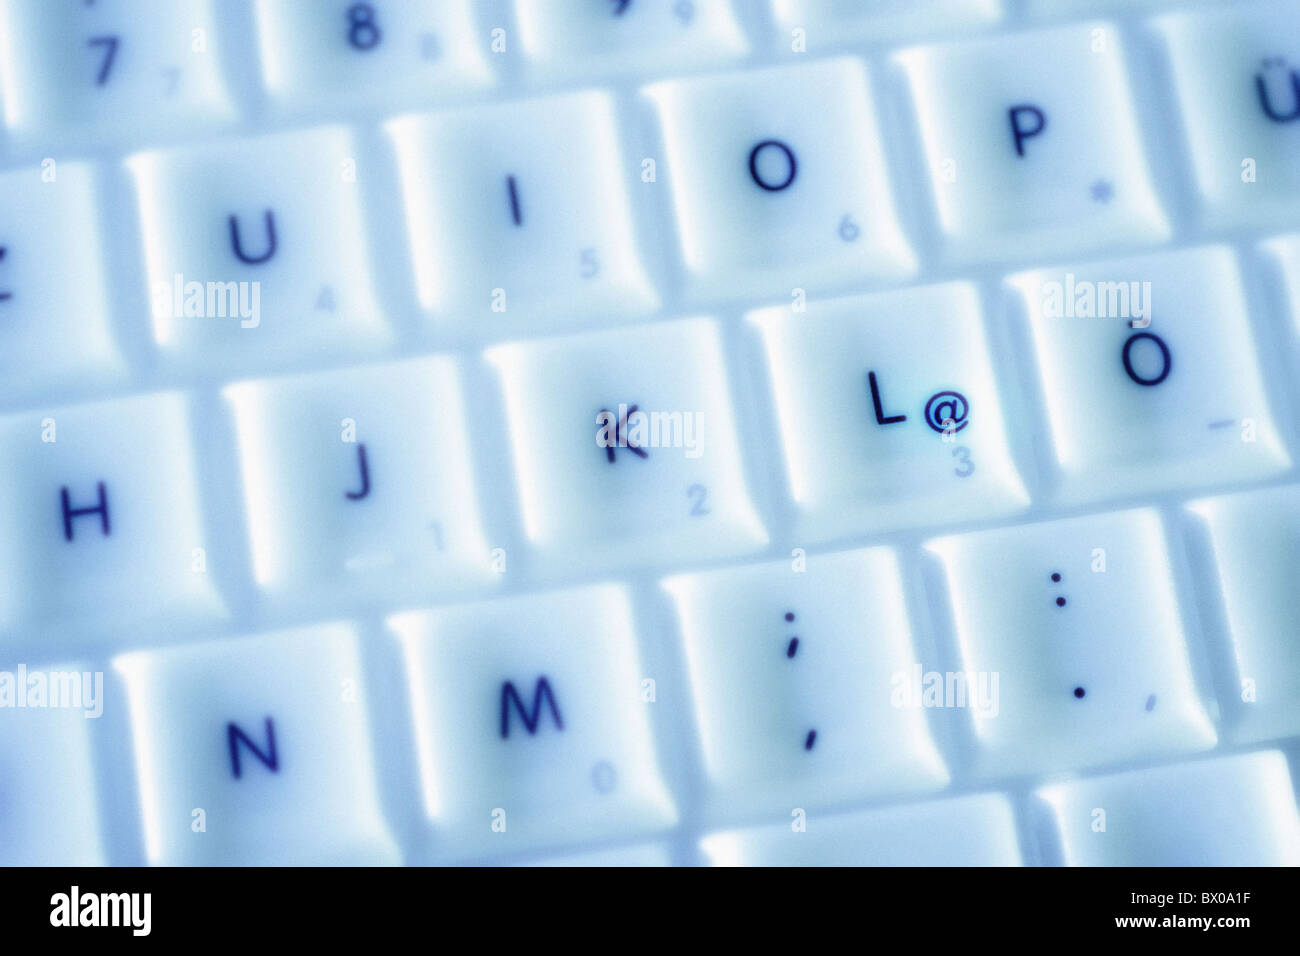 Mail Email 10634871 AT computer detail e EDP numbers symbols keyboard keys white figures signs marks figures digits Stock Photo